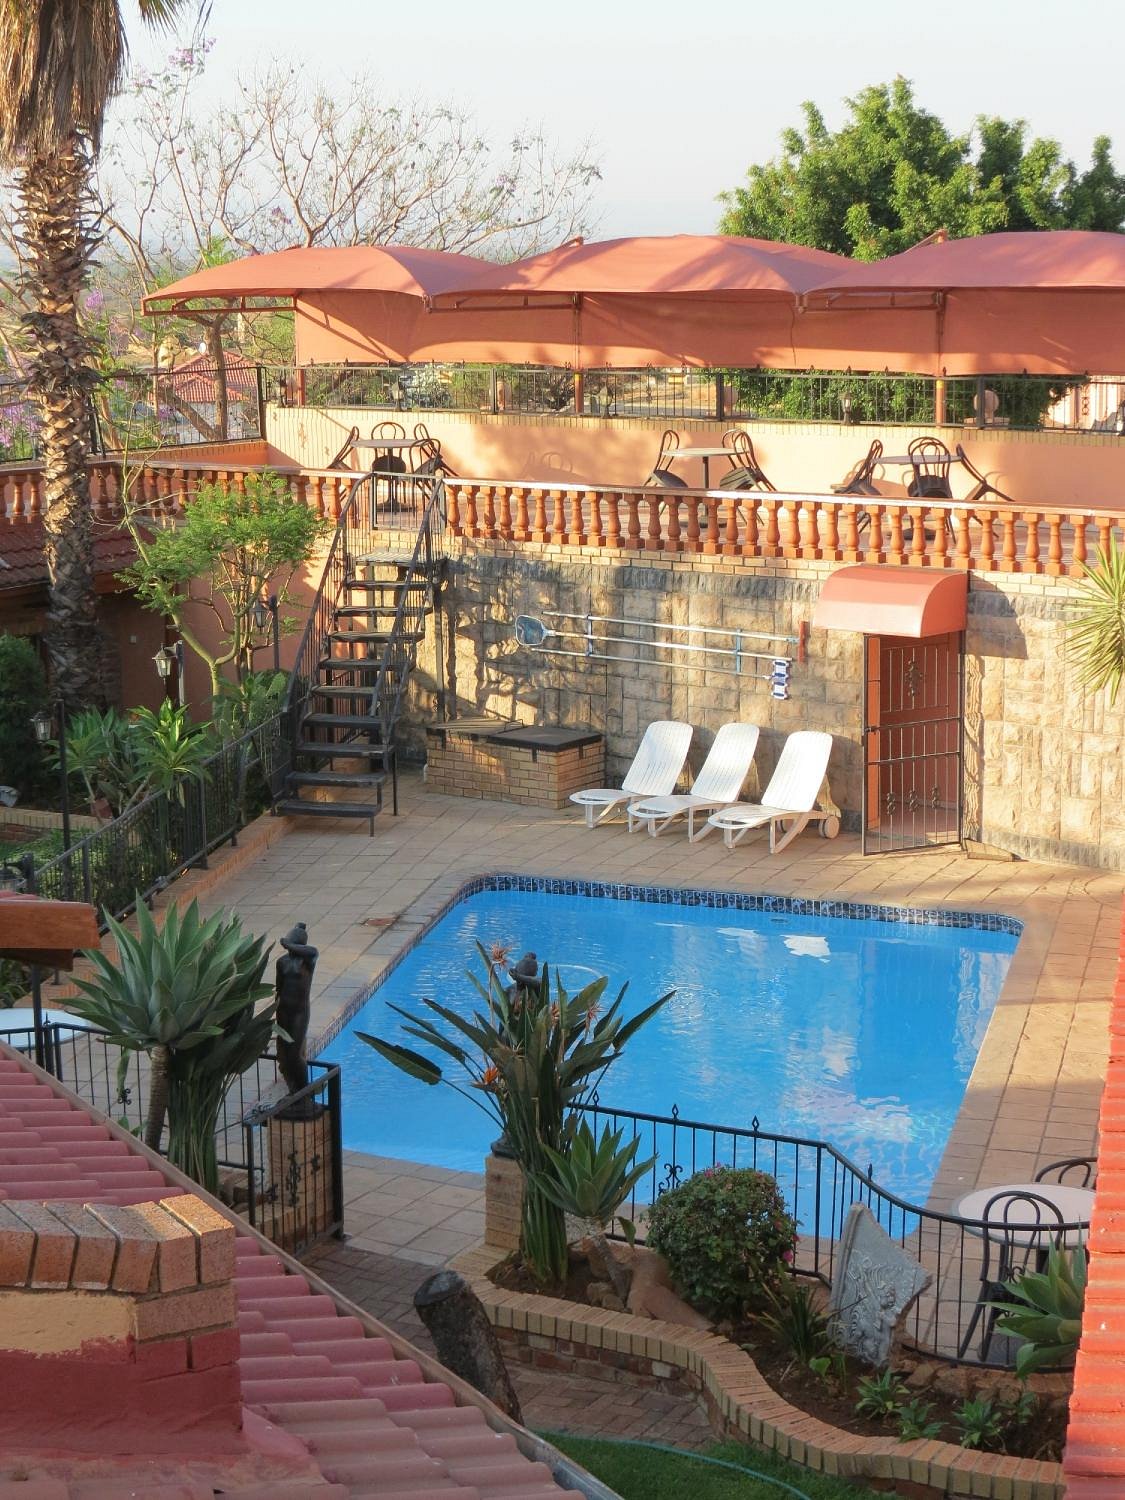 Valley View Guest House Pool Pictures & Reviews Tripadvisor